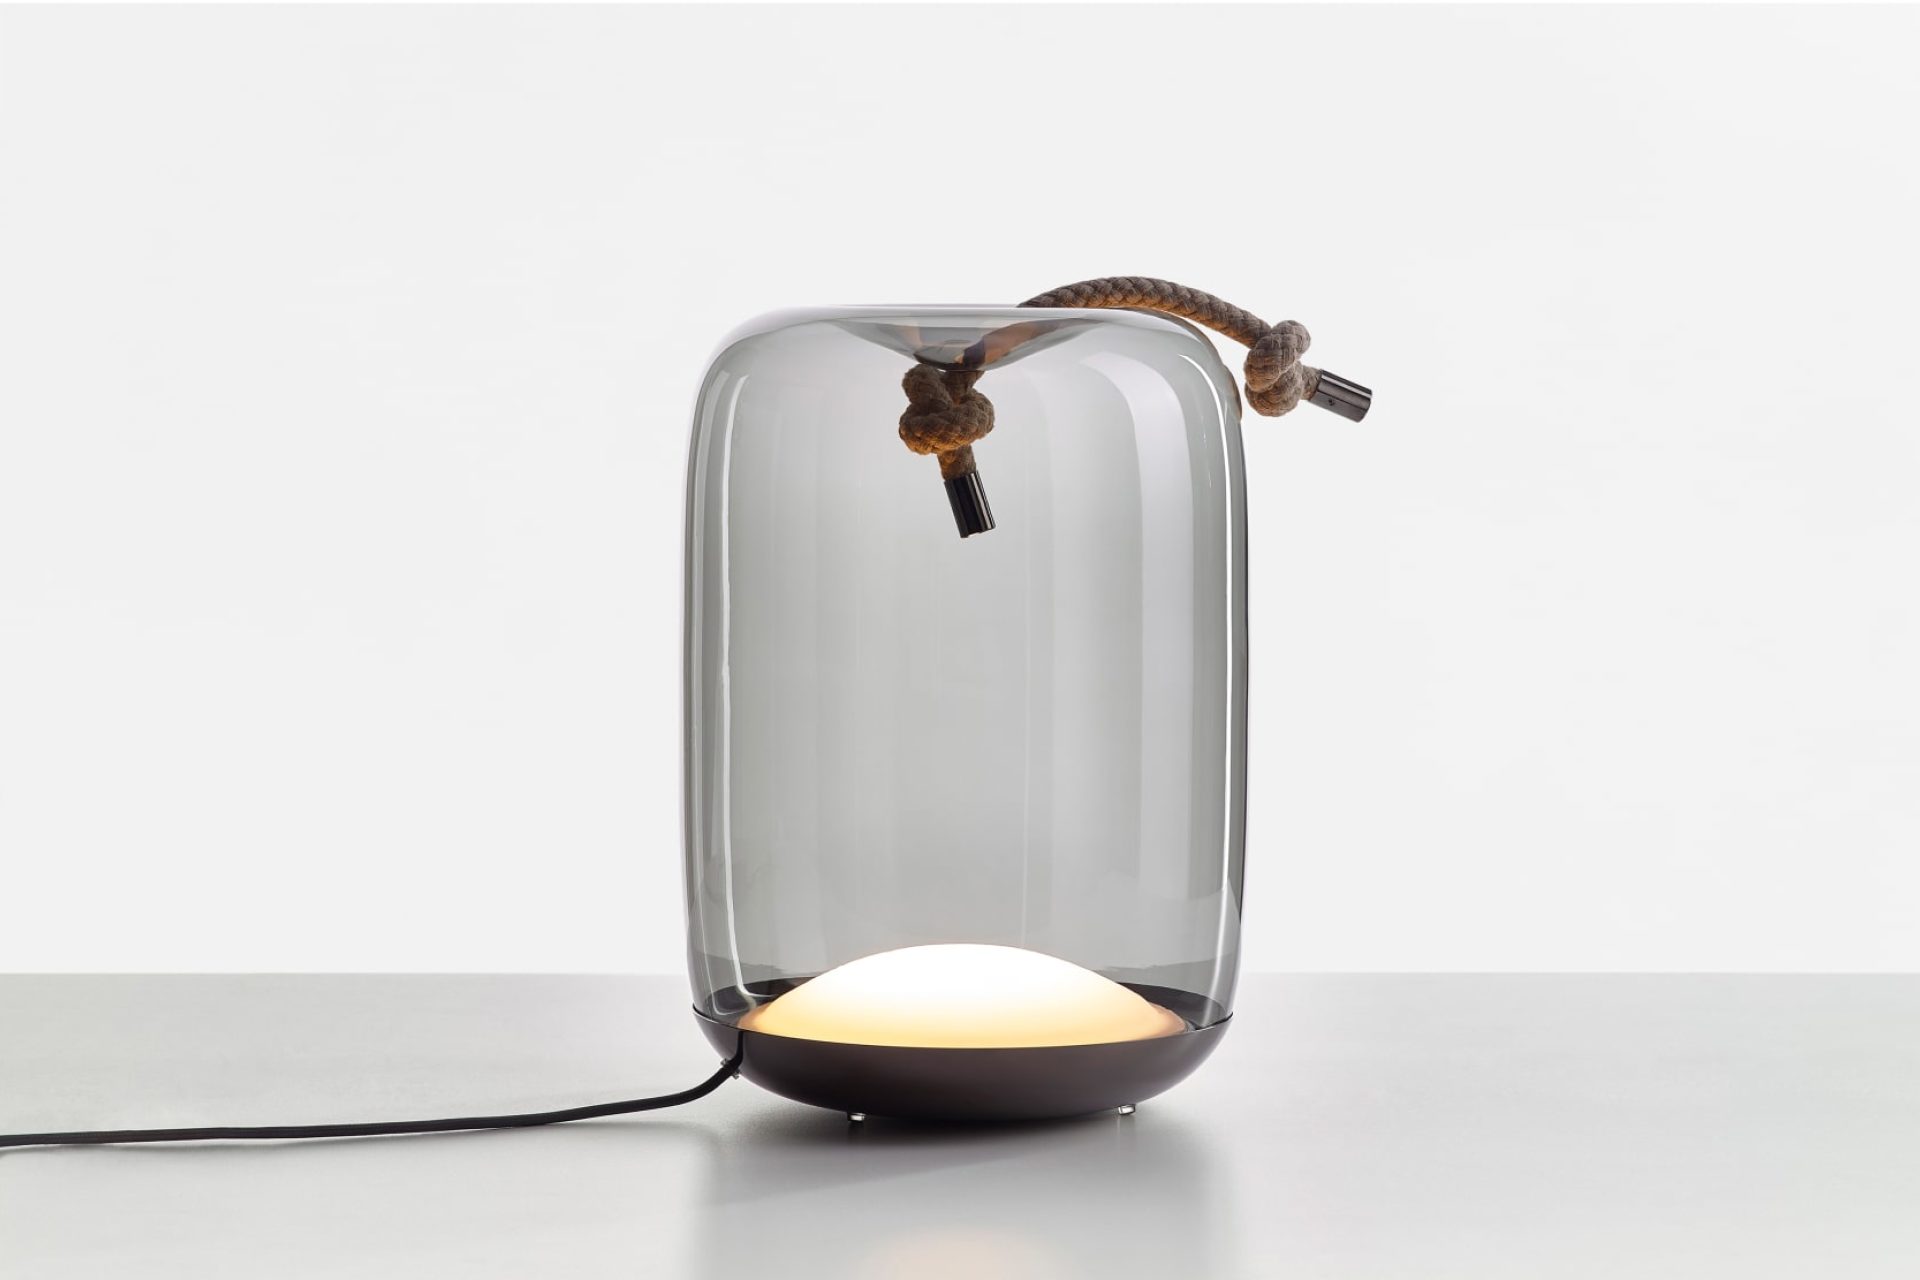 Table lamp made of glass with a decorative piece of rope